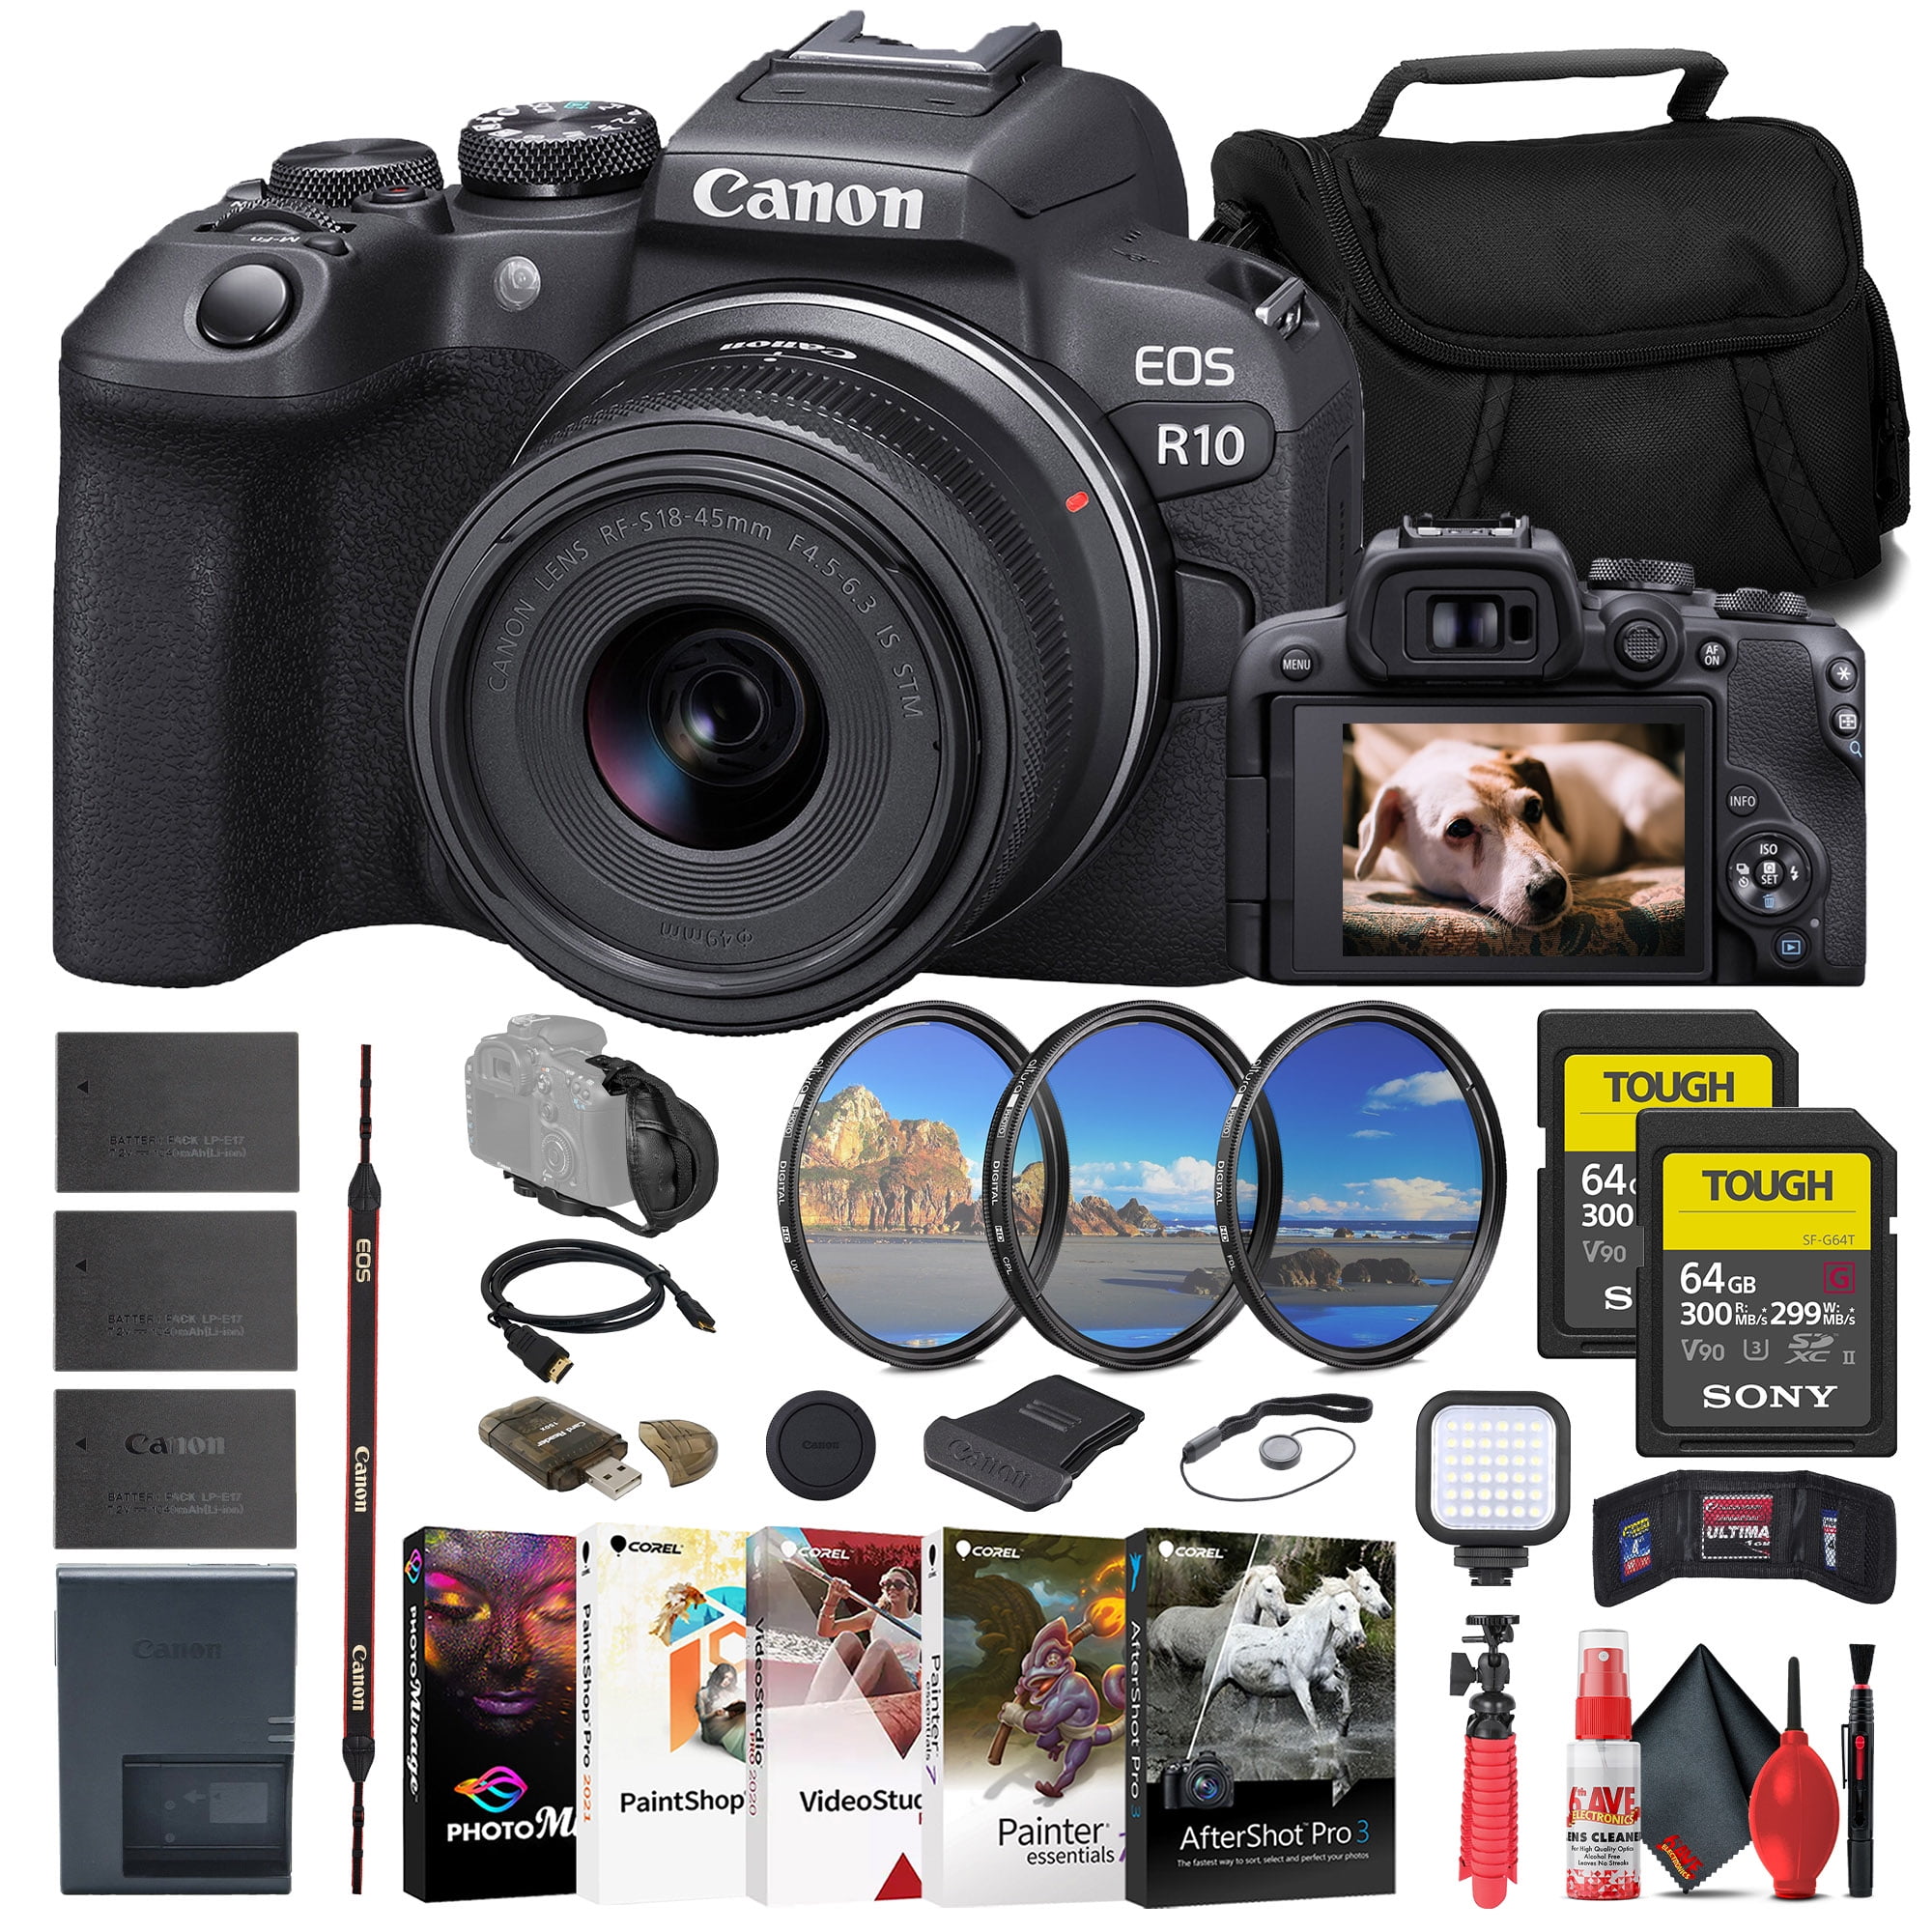  Canon EOS R100 Mirrorless Camera with 18-45mm and 55-210mm  Lenses Kit (6052C022) + Bag + 64GB Card + LPE17 Battery + Charger + Card  Reader + Flex Tripod + Cleaning Kit + Memory Wallet (Renewed) : Electronics